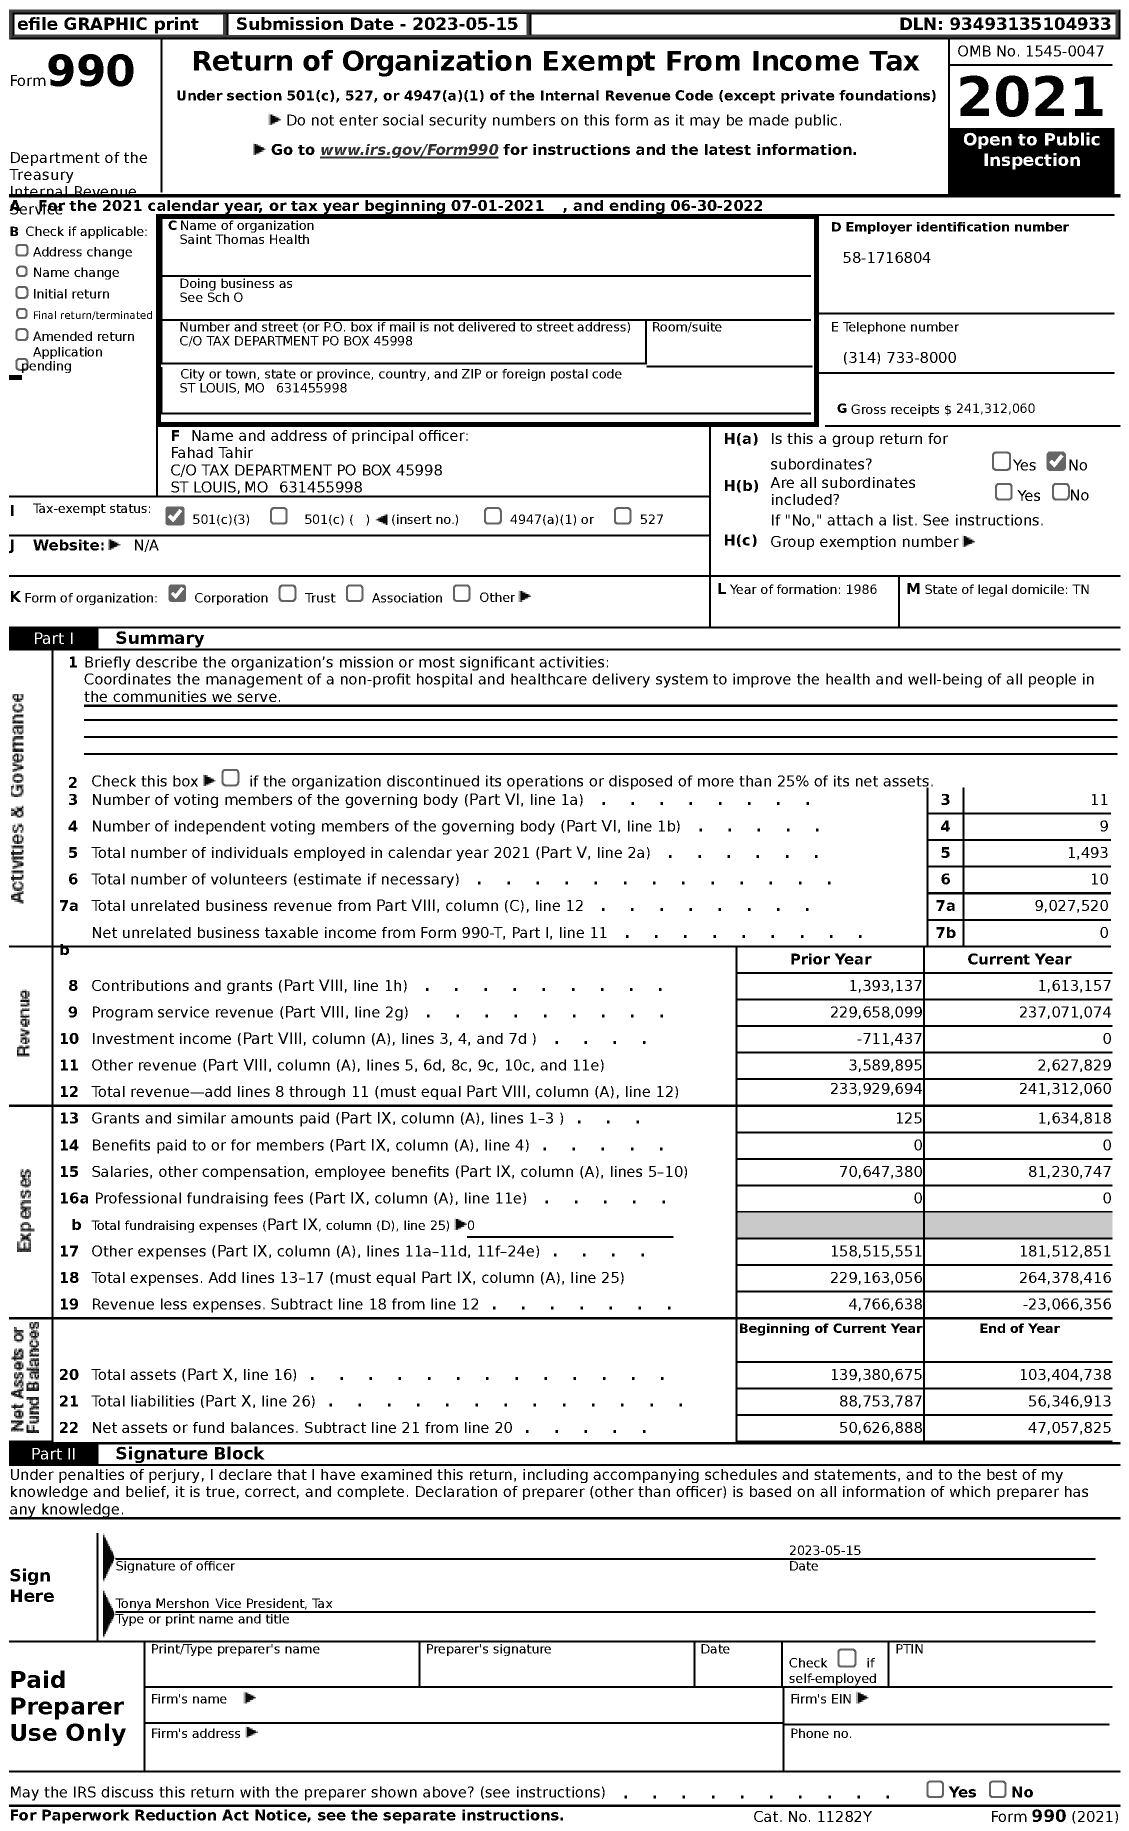 Image of first page of 2021 Form 990 for See Sch O / Saint Thomas Health (STHe)